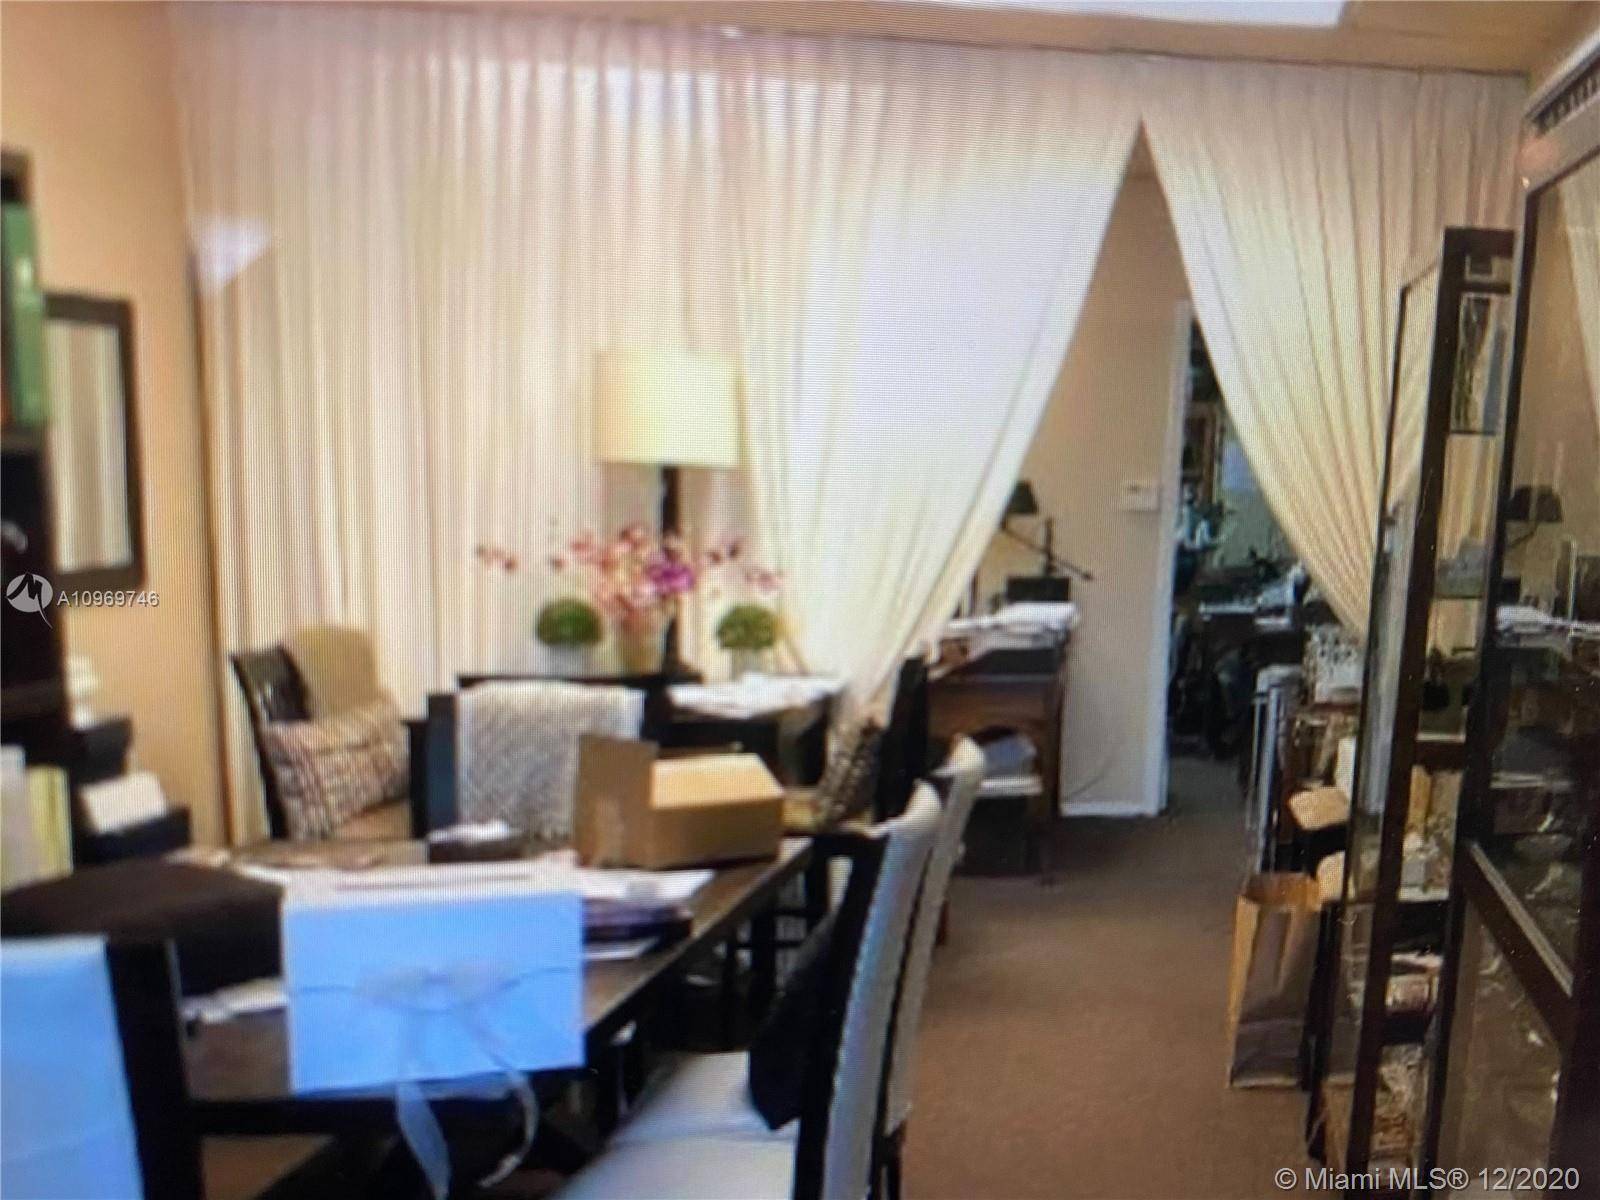 SPACE FOR RENT IN AN UPSCALE LOCATION IN CORAL GABLES NEAR MIRACLE MILE GOOD FOR WEDDING, JEWELRY, ACCESSORIES.